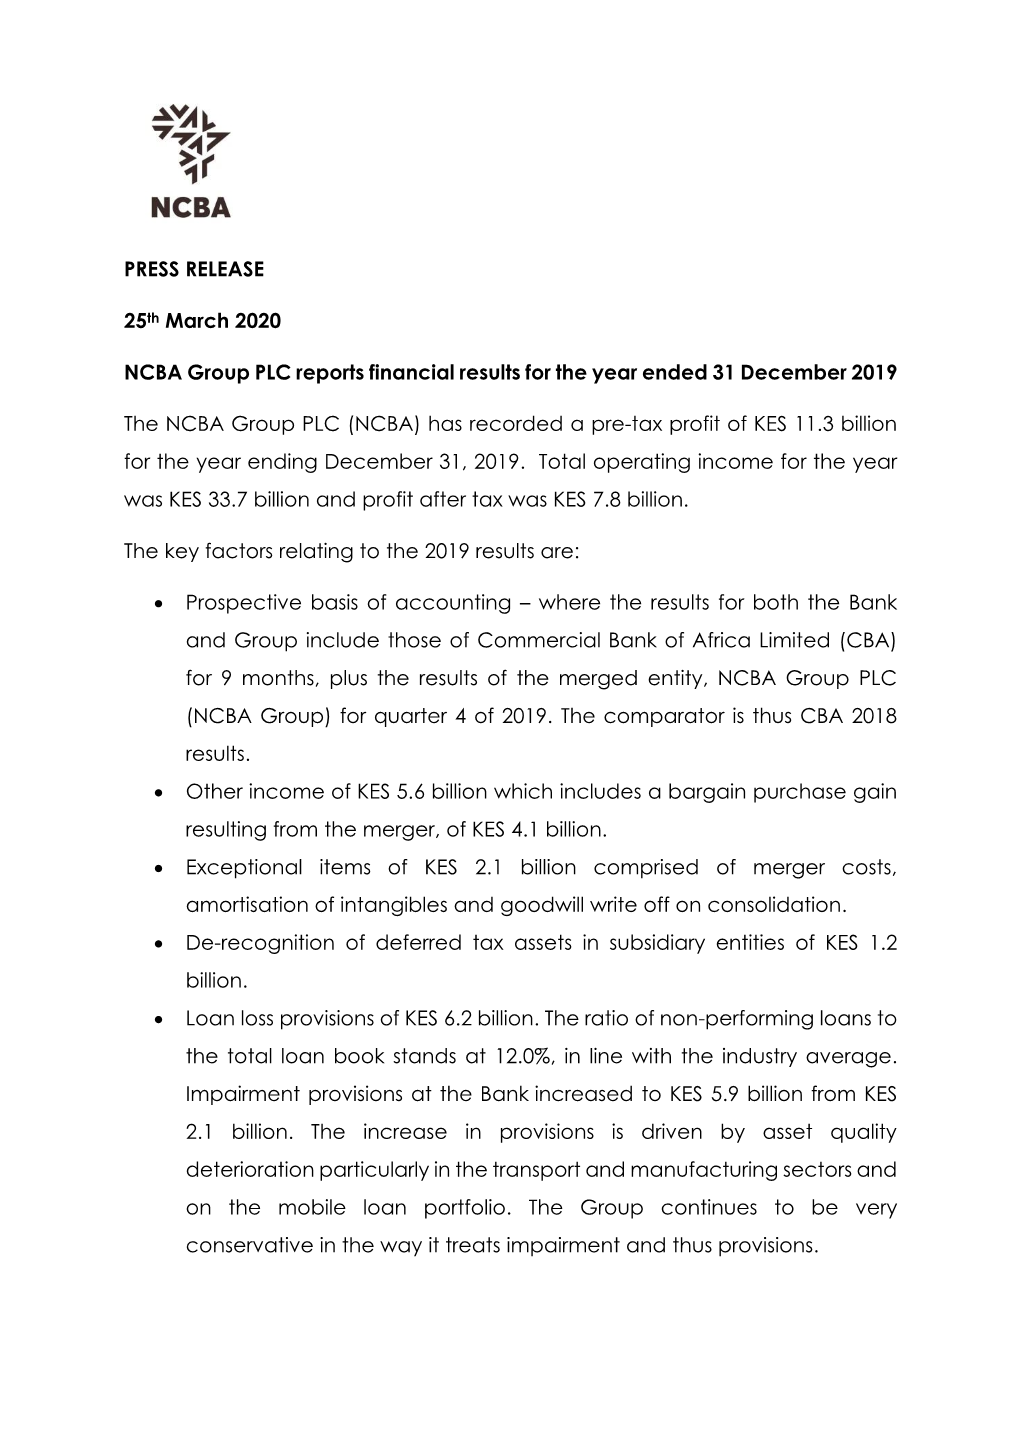 PRESS RELEASE 25Th March 2020 NCBA Group PLC Reports Financial